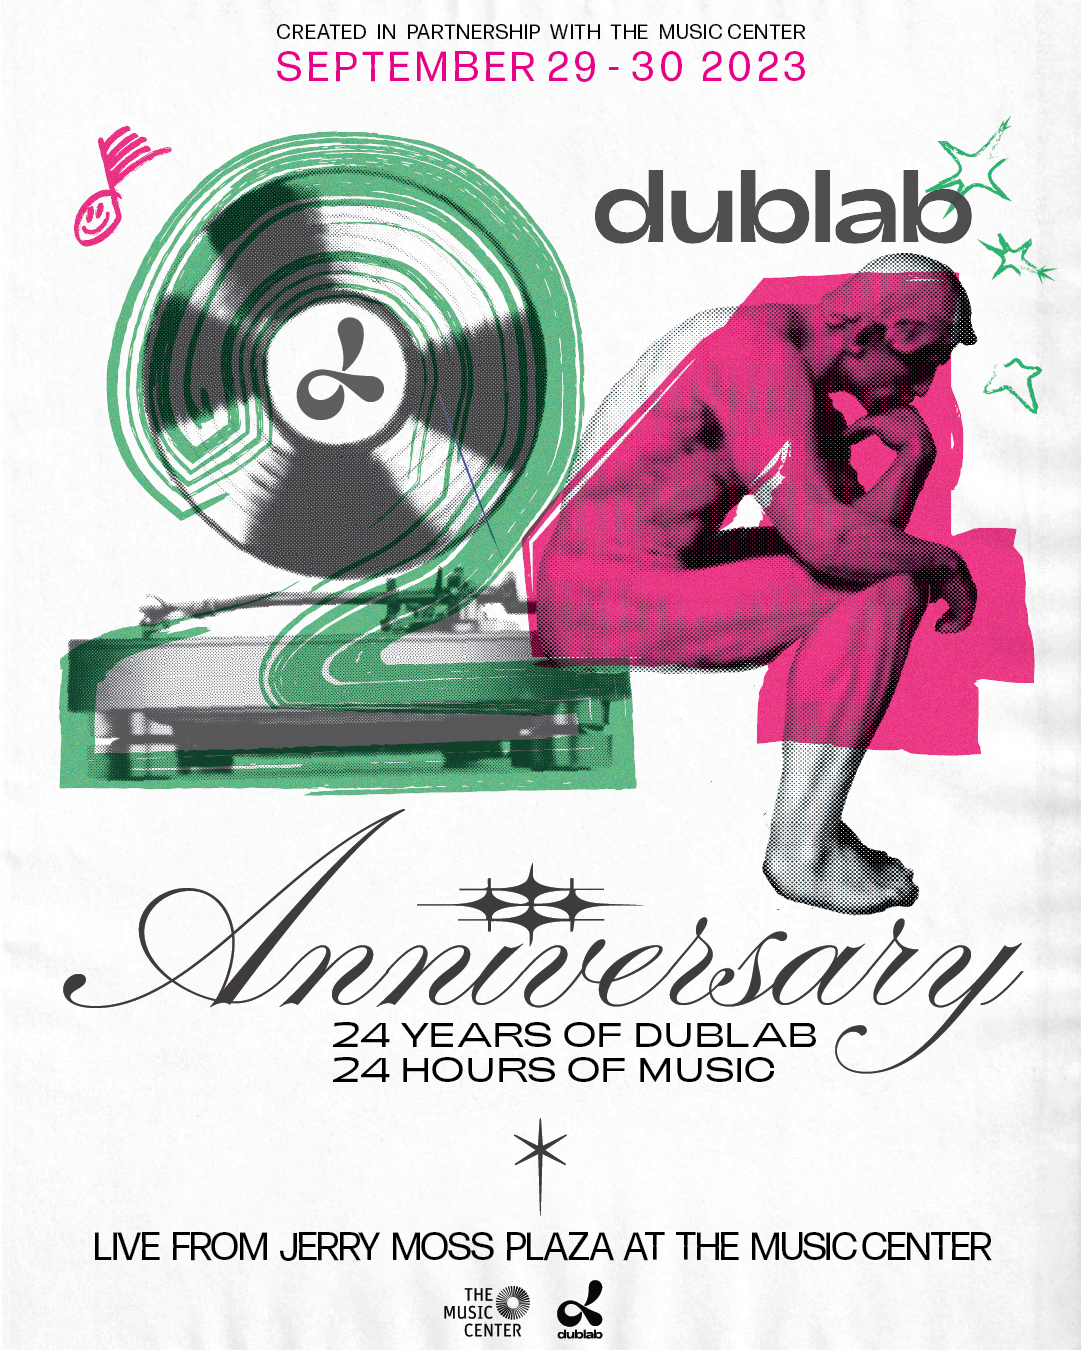 dublab's 24 year anniversary with 24 hours of live music - フライヤー表